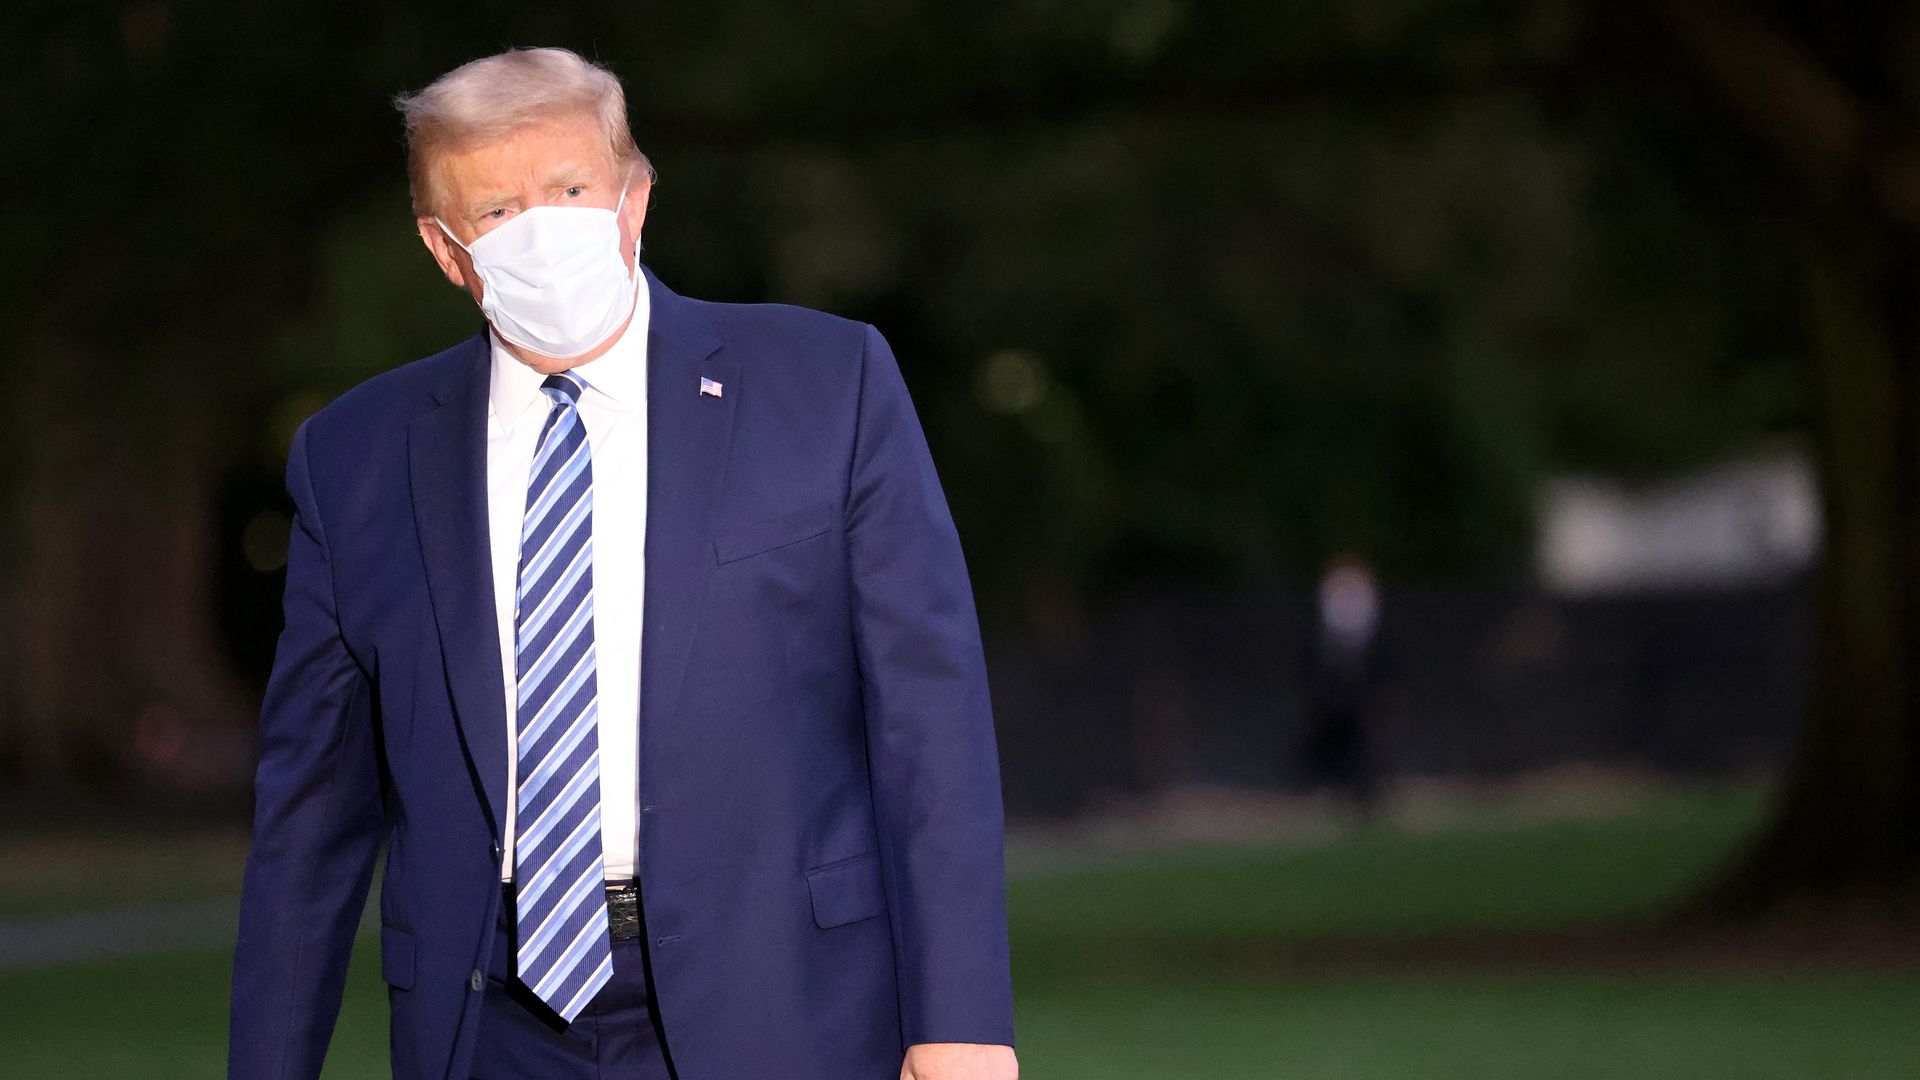 U.S. President Donald Trump returns to the White House from Walter Reed National Military Medical Center wearing a mask